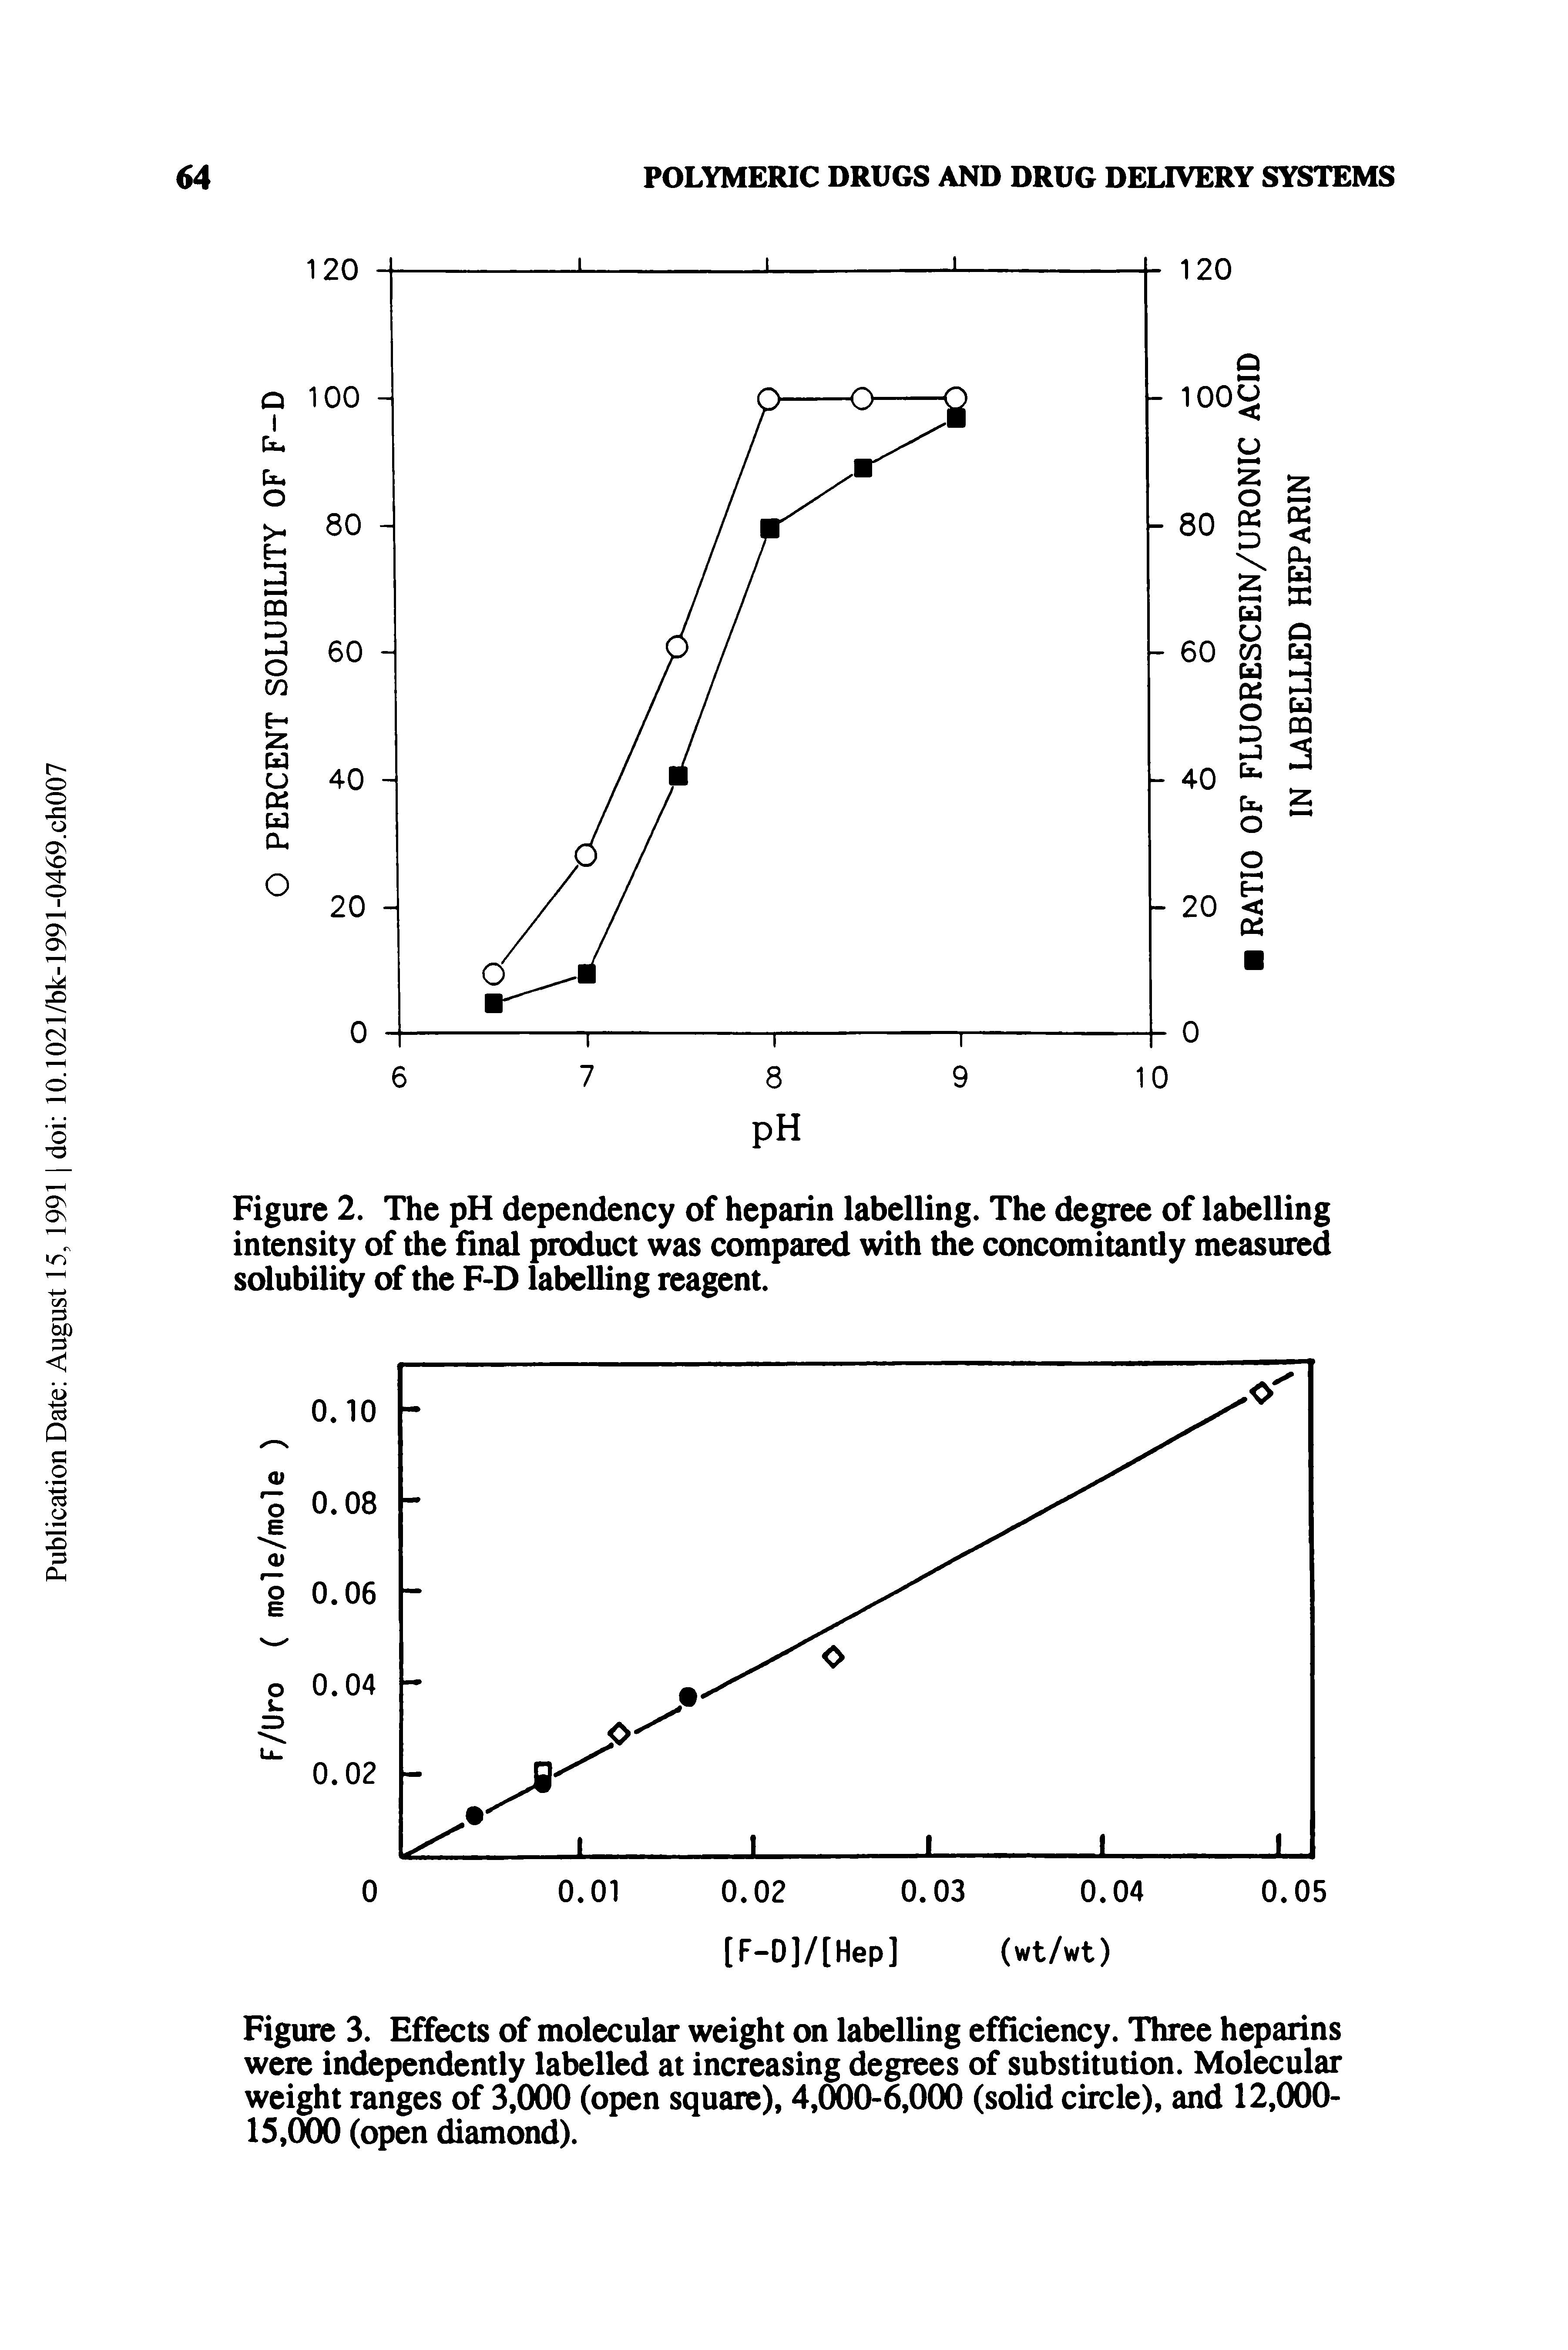 Figure 3. Effects of molecular weight on labelling efficiency. Three heparins were independently labelled at increasing degrees of substitution. Molecular weight ranges of 3,000 (open square), 4,000-6,000 (solid circle), and 12,000-15,000 (open diamond).